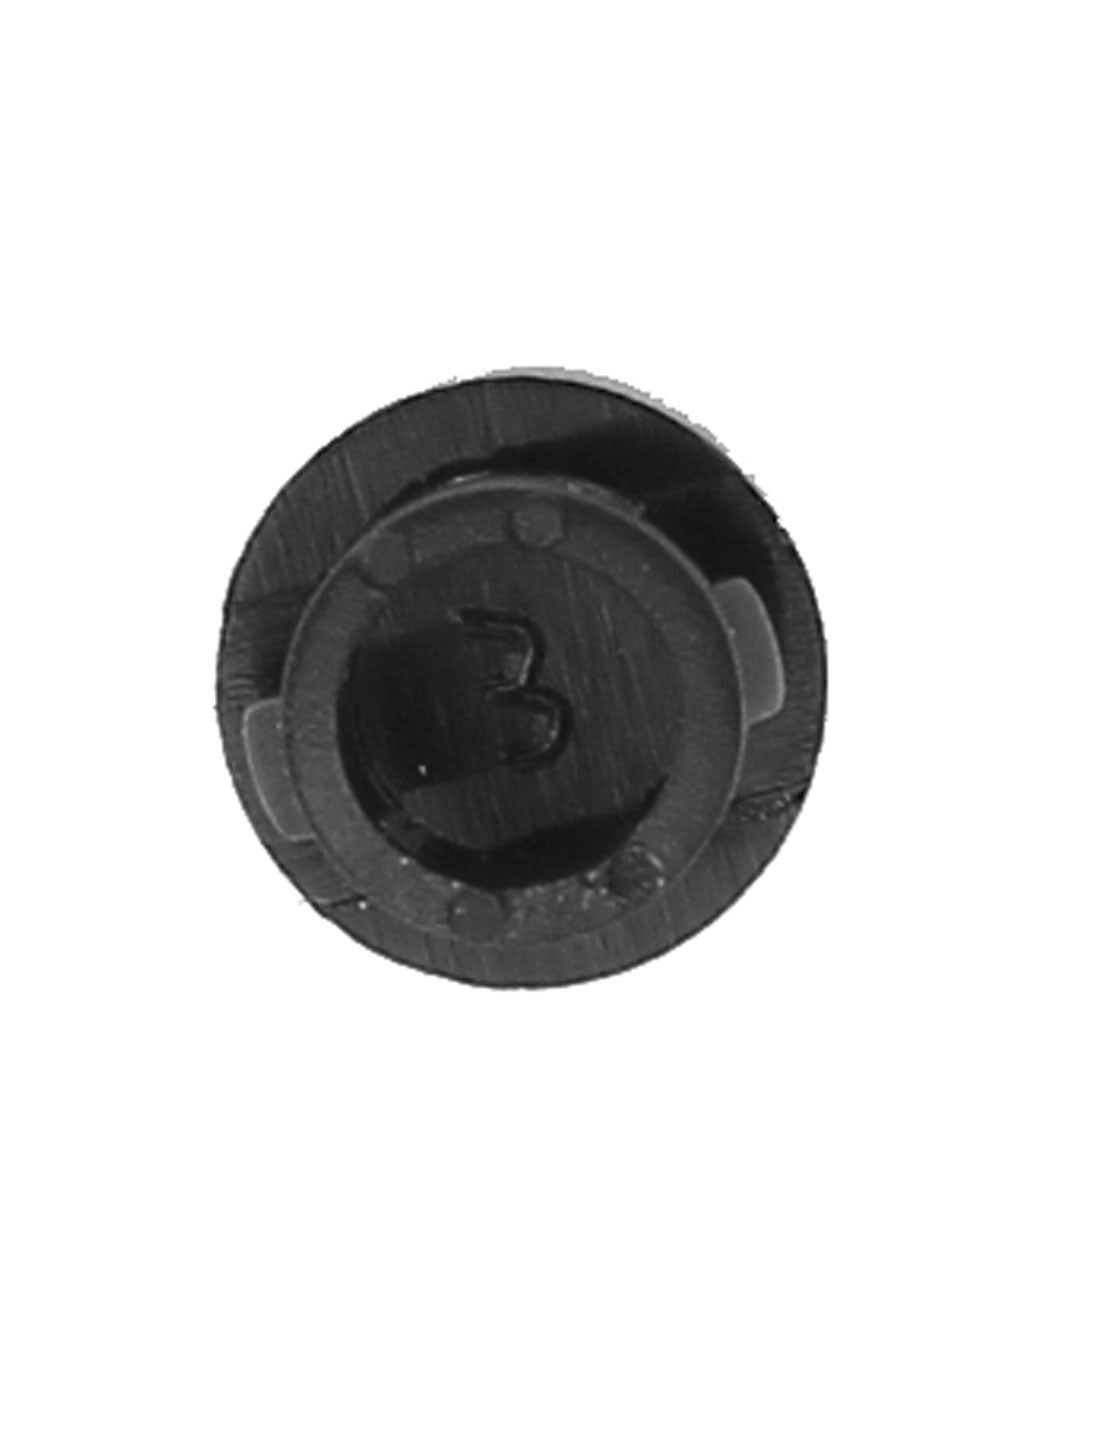 uxcell Uxcell HP-6 Black Nylon Round Snap in Mounting Locking 6mm Panel Hole Cover 10pcs